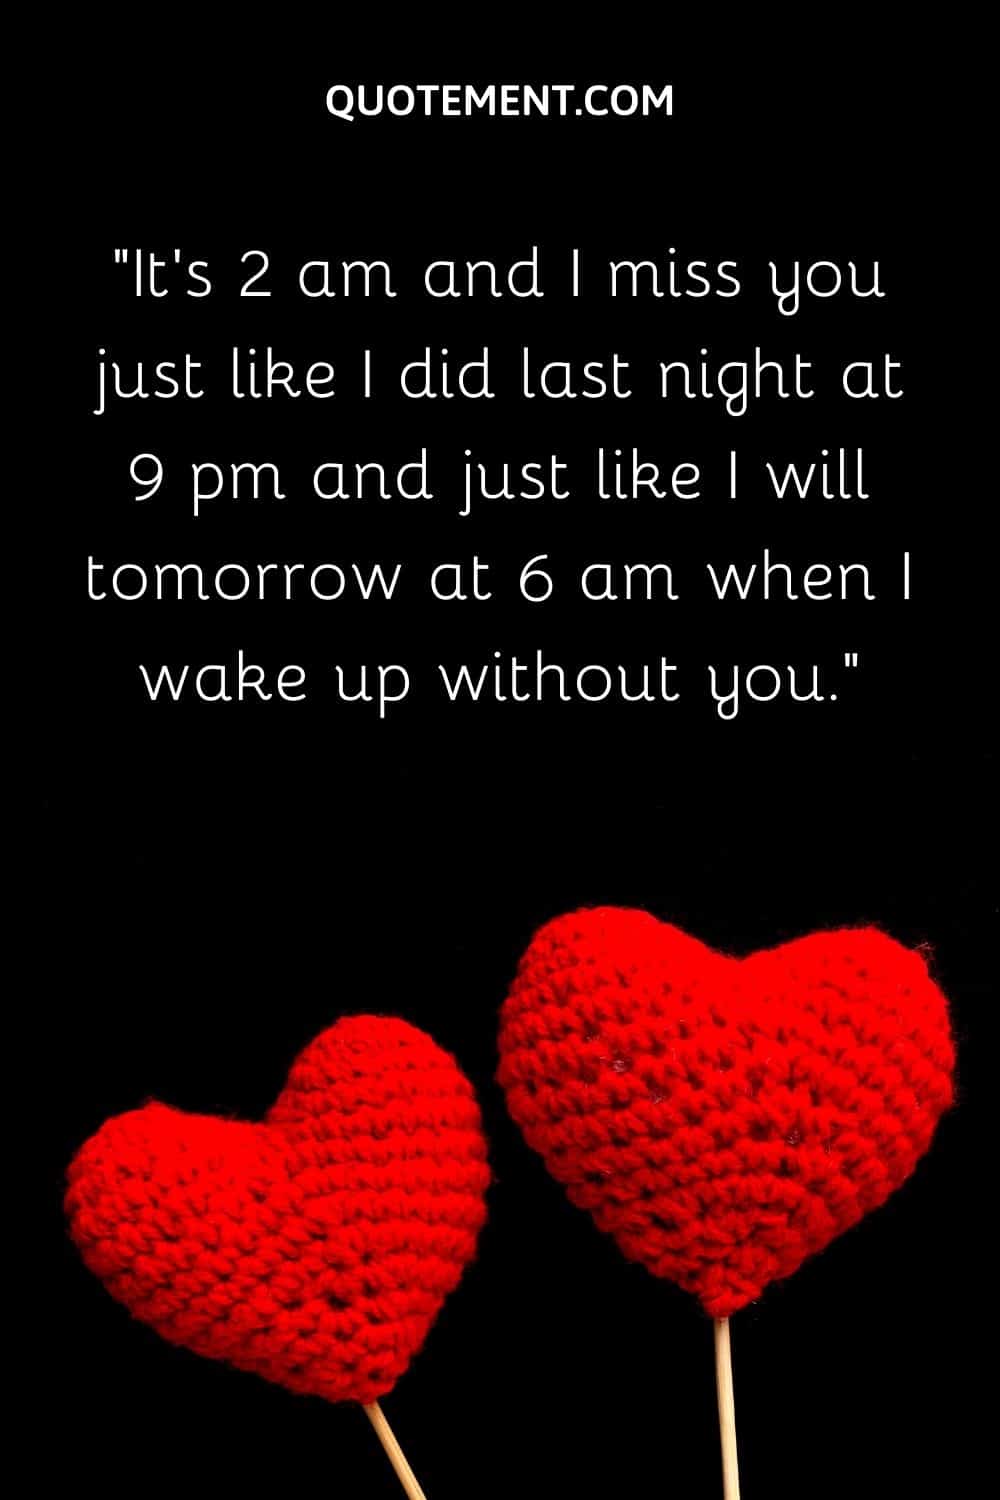 It's 2 am and I miss you just like I did last night at 9 pm and just like I will tomorrow at 6 am when I wake up without you.